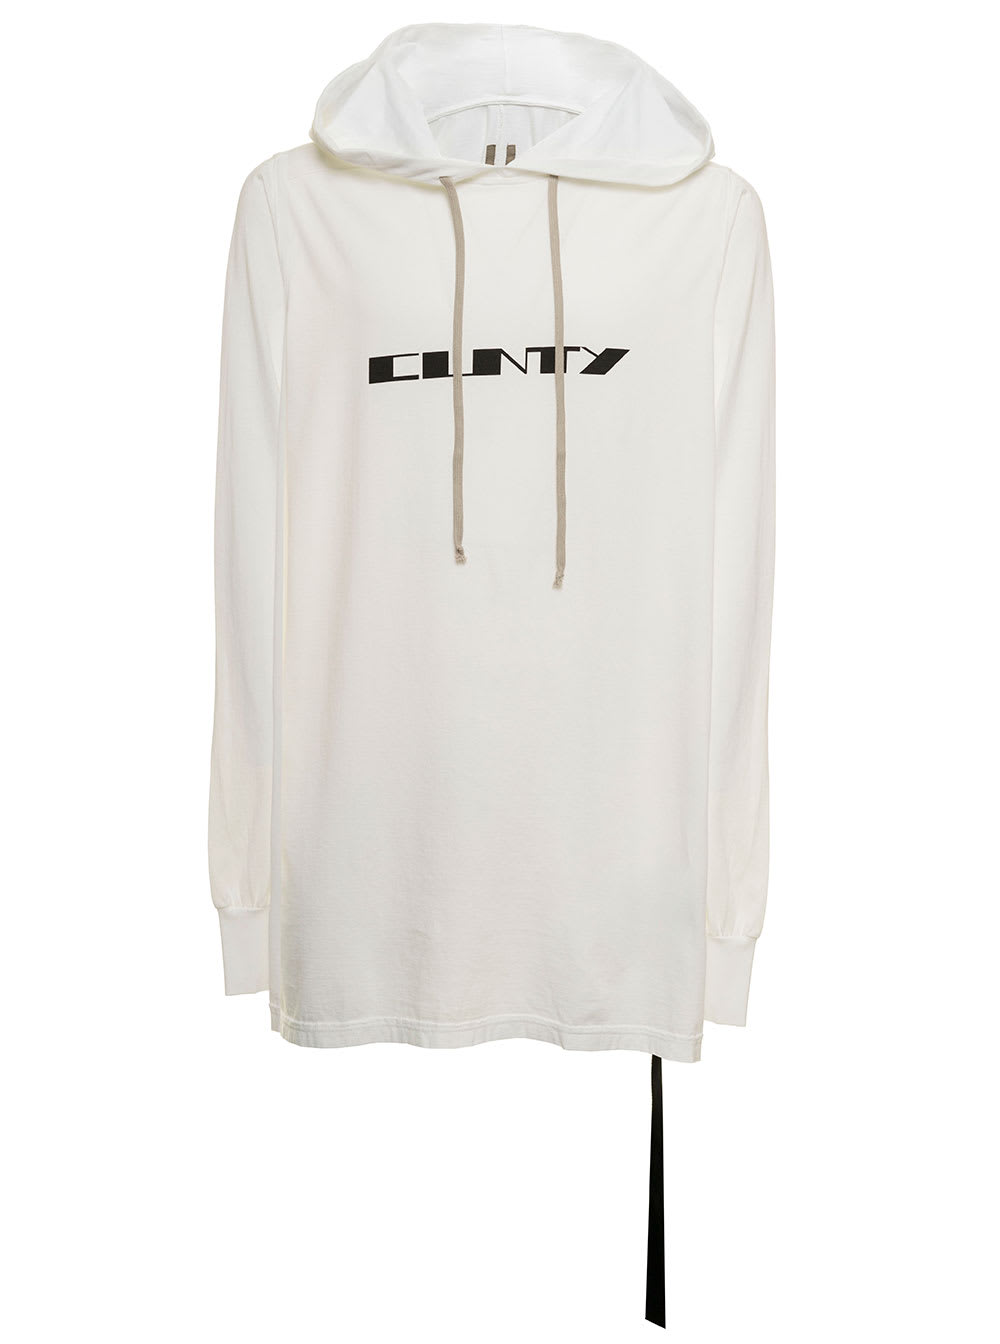 Drkshdw Man White Cotton Hoodie With Print